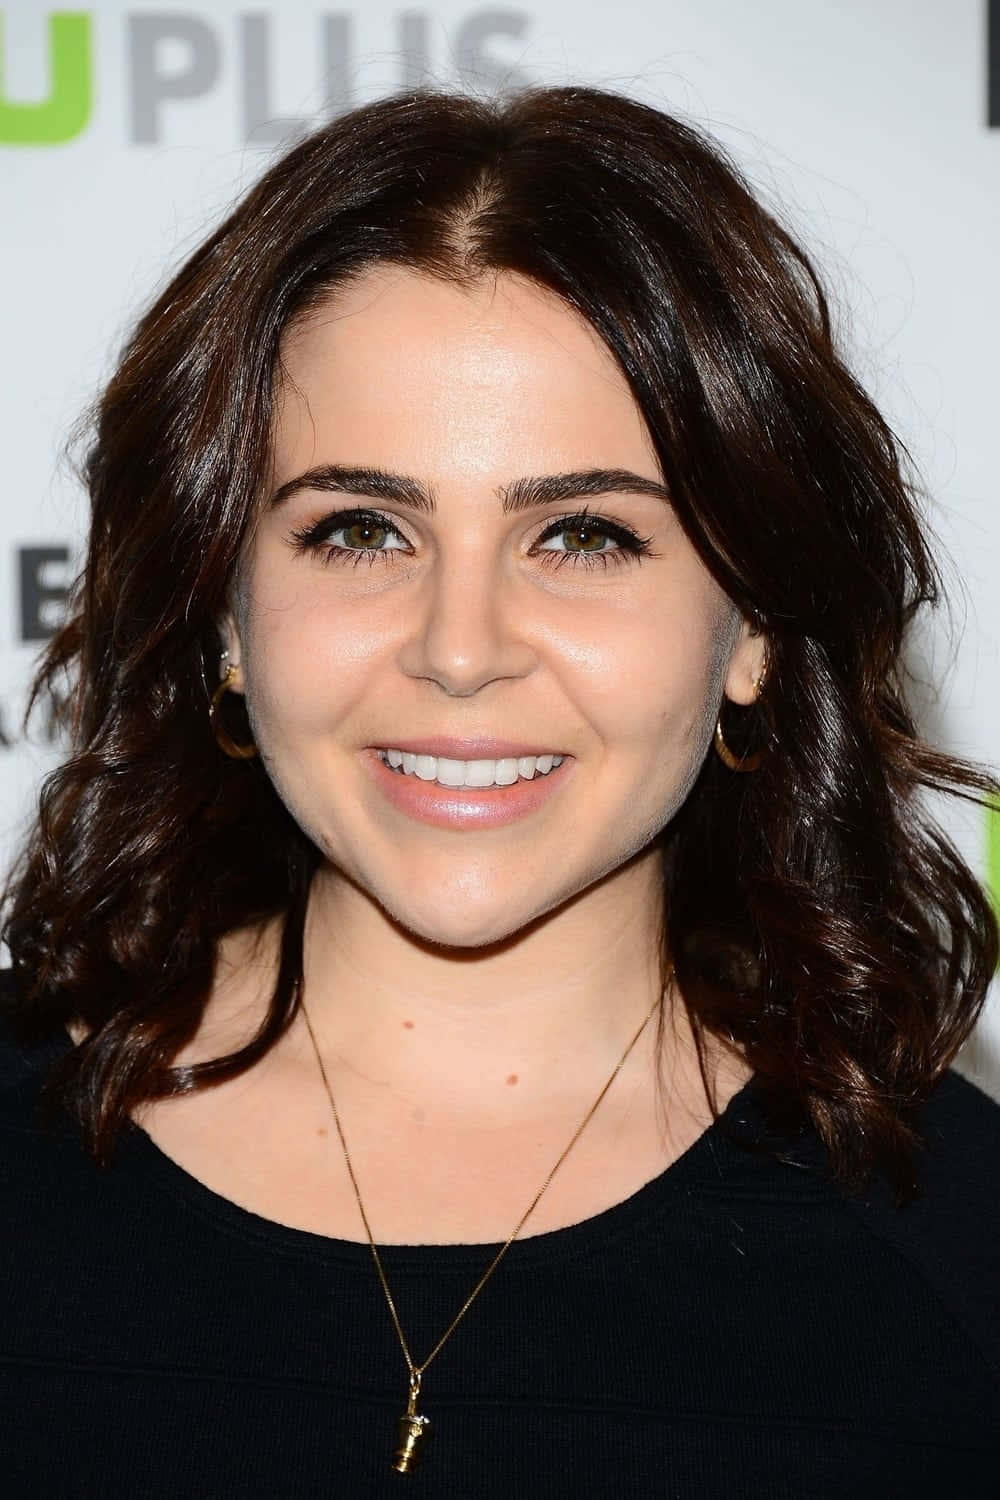 Mae Whitman posing confidently in a stylish outfit Wallpaper